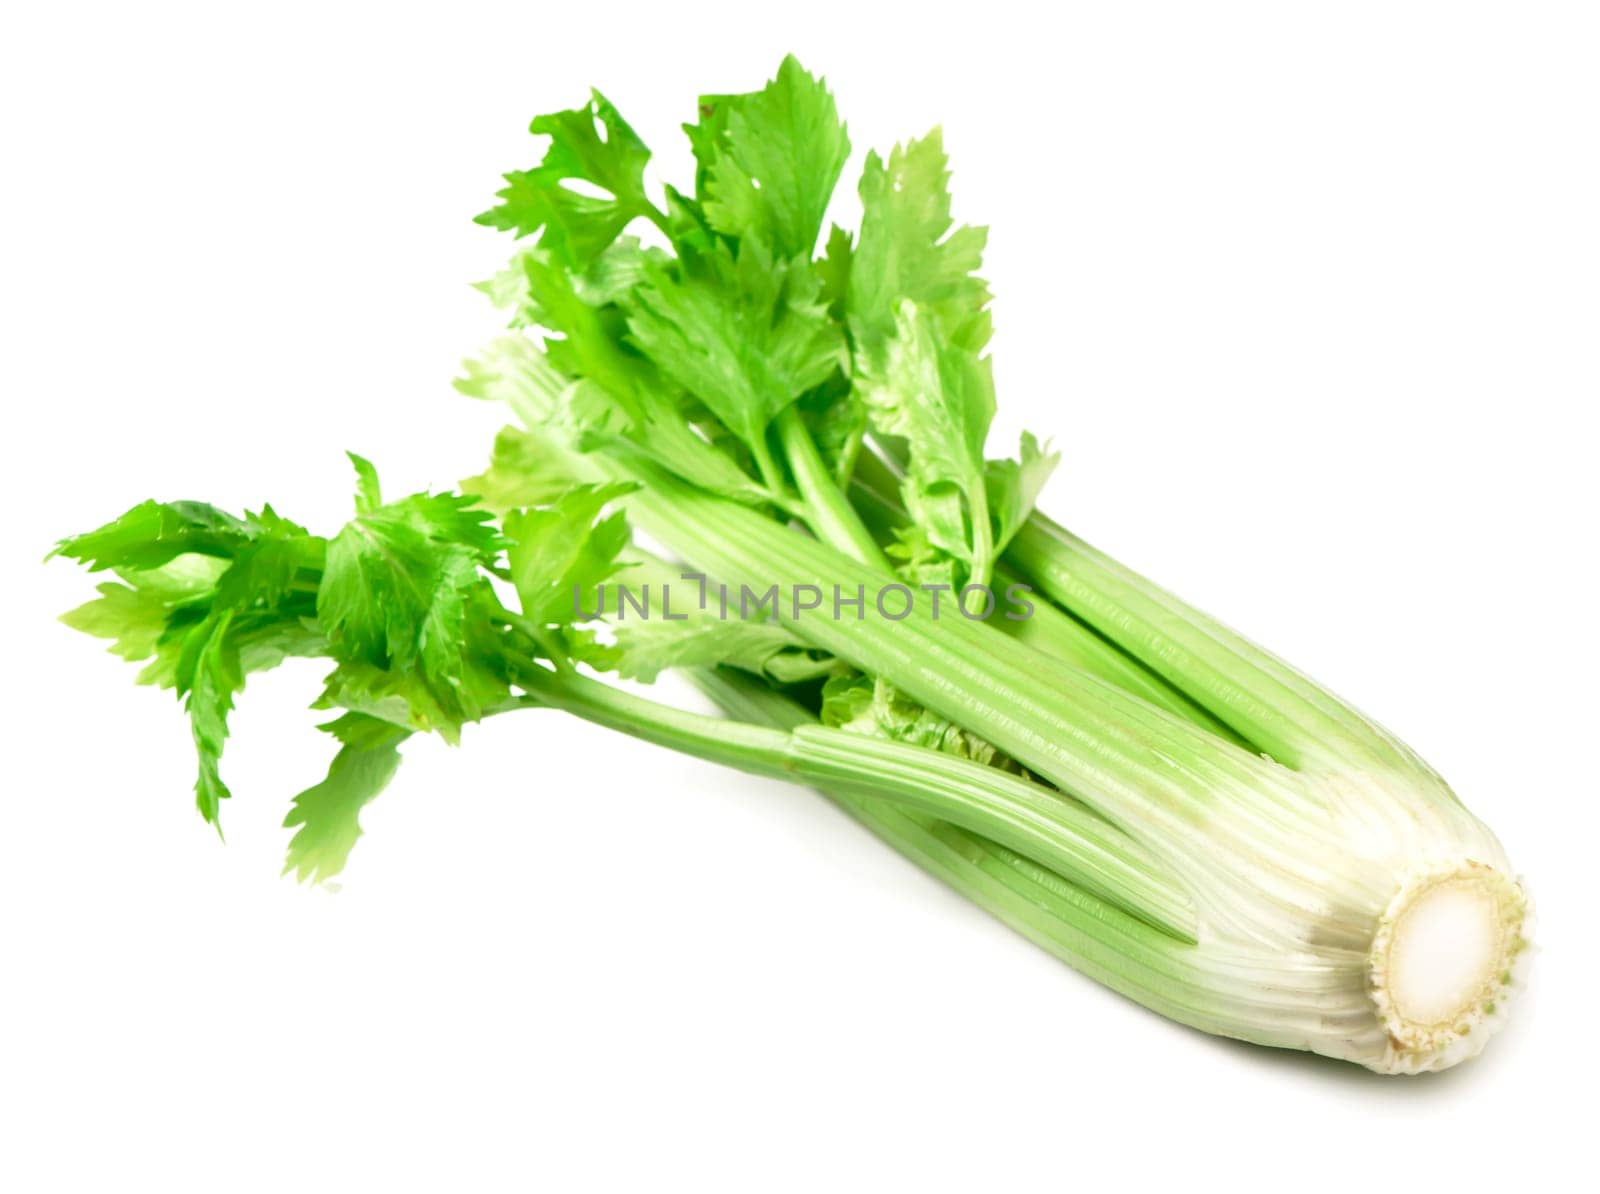 Raw green fresh leaves and stems of celery isolated on white background by aprilphoto